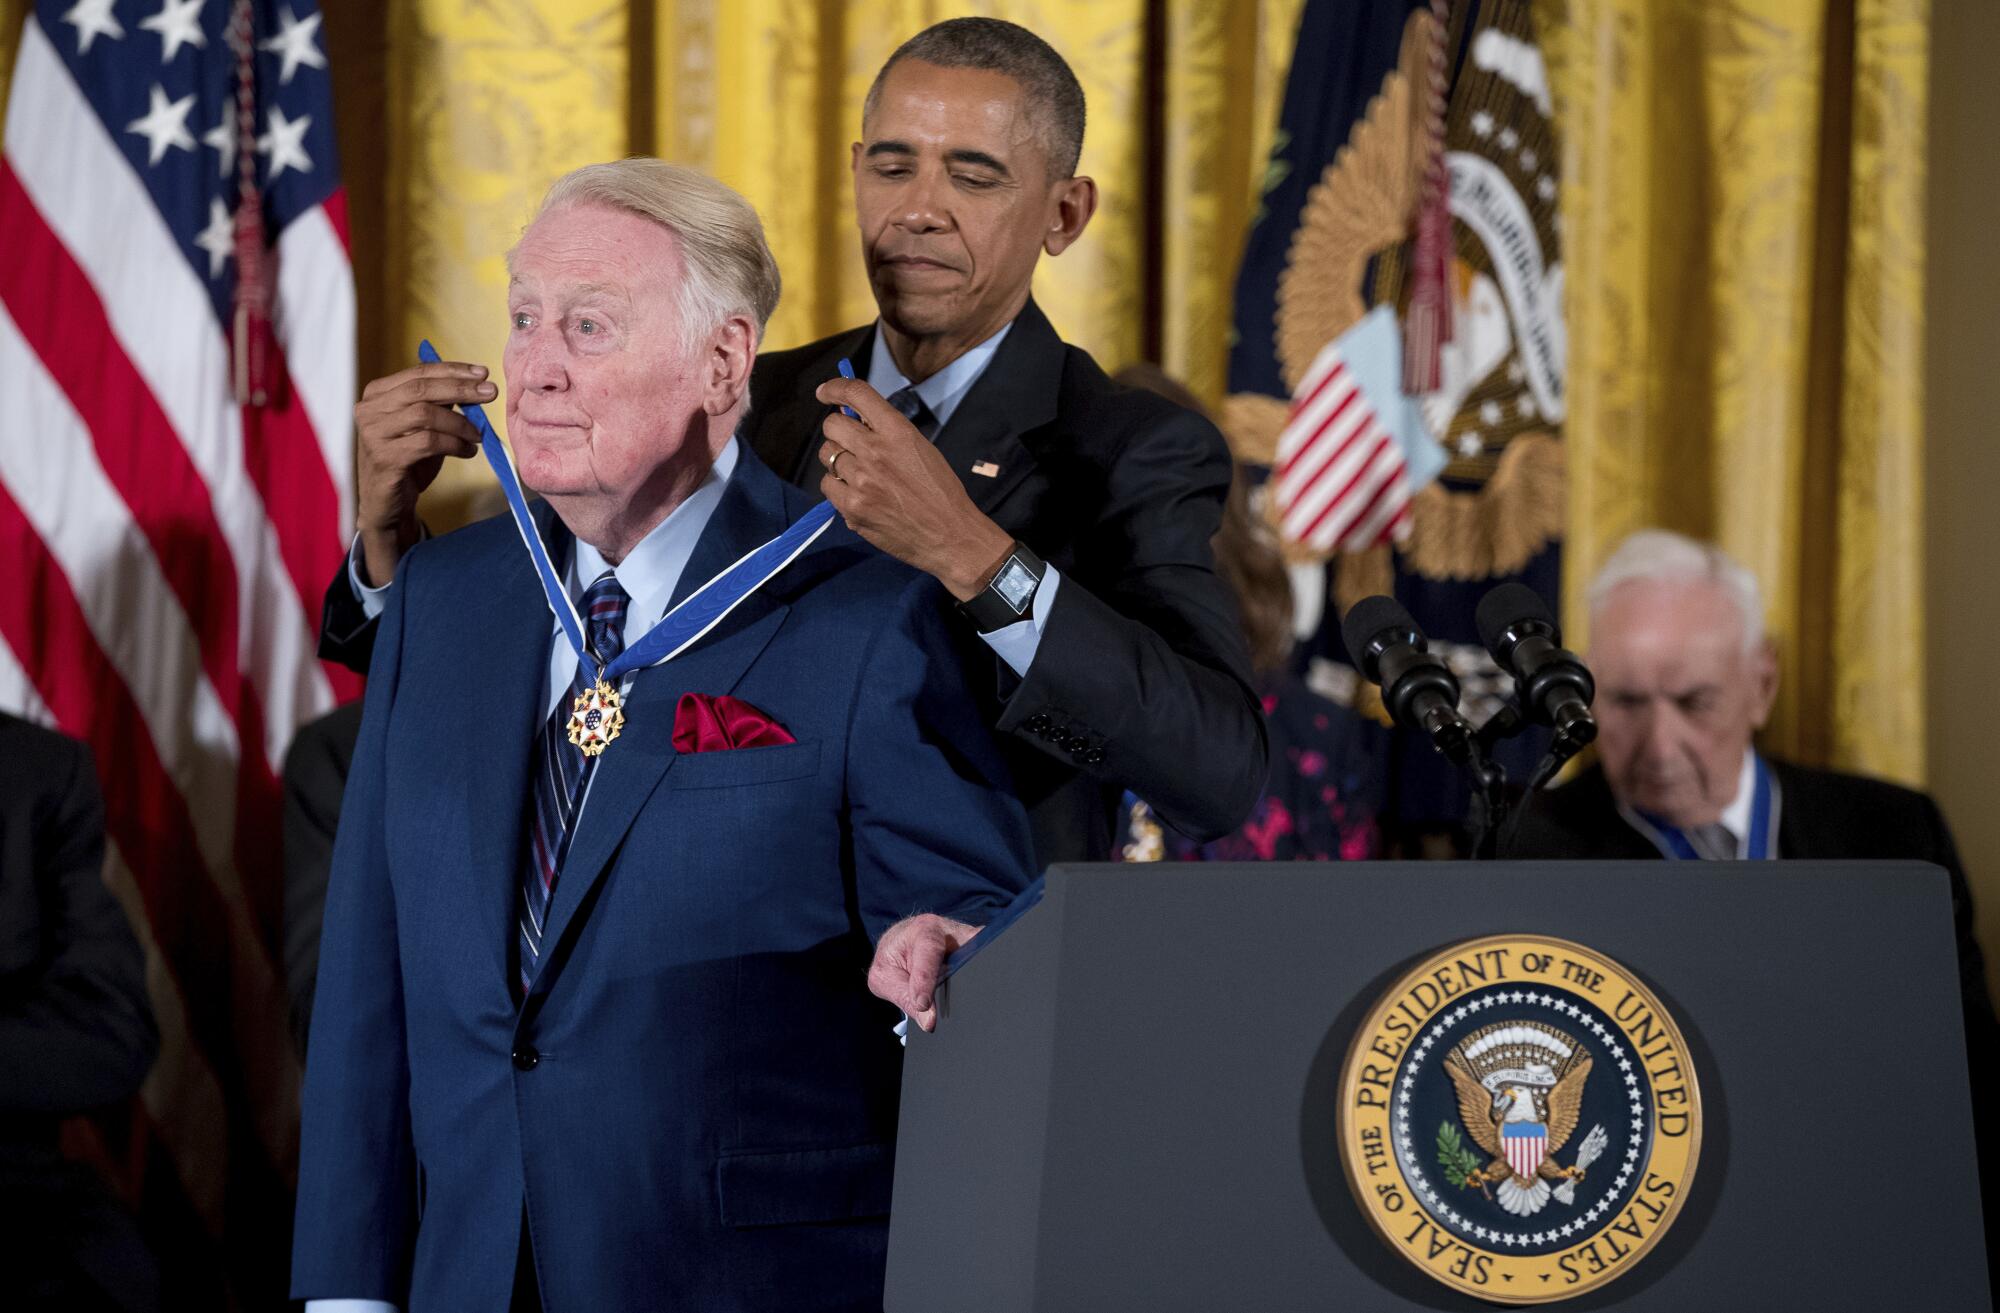 President Barack Obama presents the Presidential Medal of Freedom to Dodgers broadcaster Vin Scully.